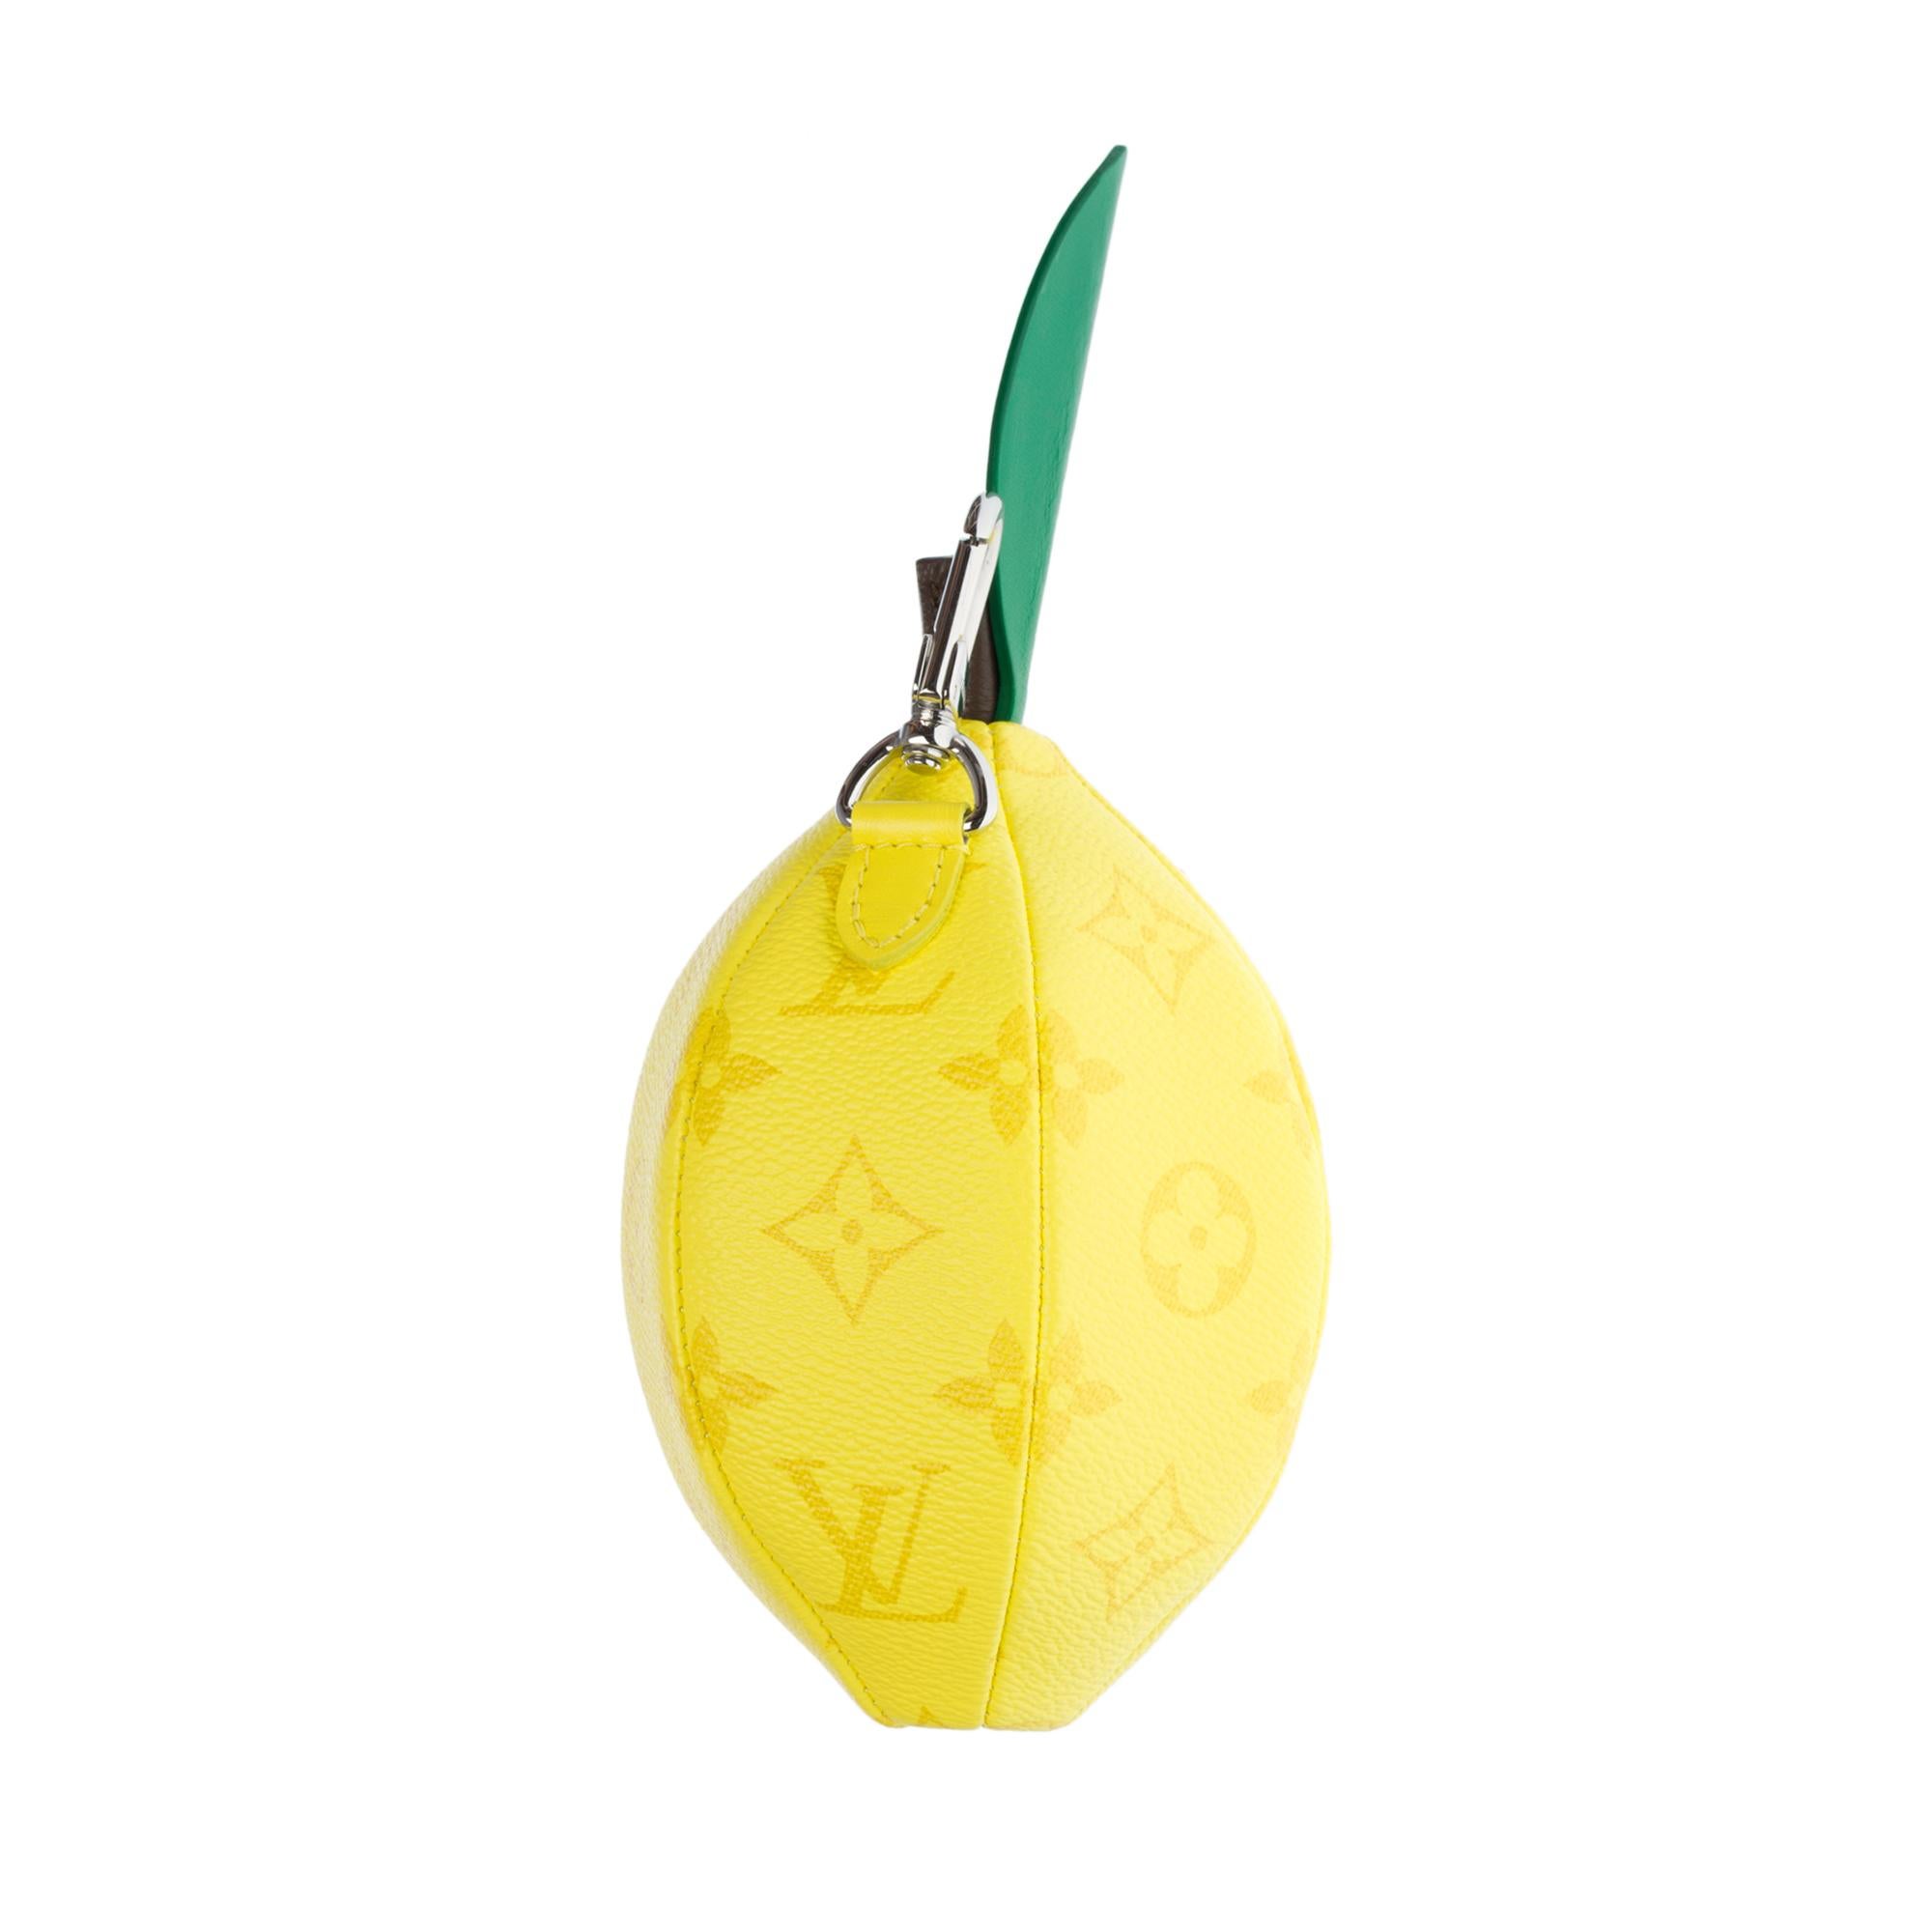 Presented during Virgil Abloh’s «Amen Break» show for the Spring-Summer 2022 collection, this new Lemon Pouch pouch is as clever as it is spectacular. Taking up the shape and color of a real lemon, it combines Louis Vuitton’s historic Monogram